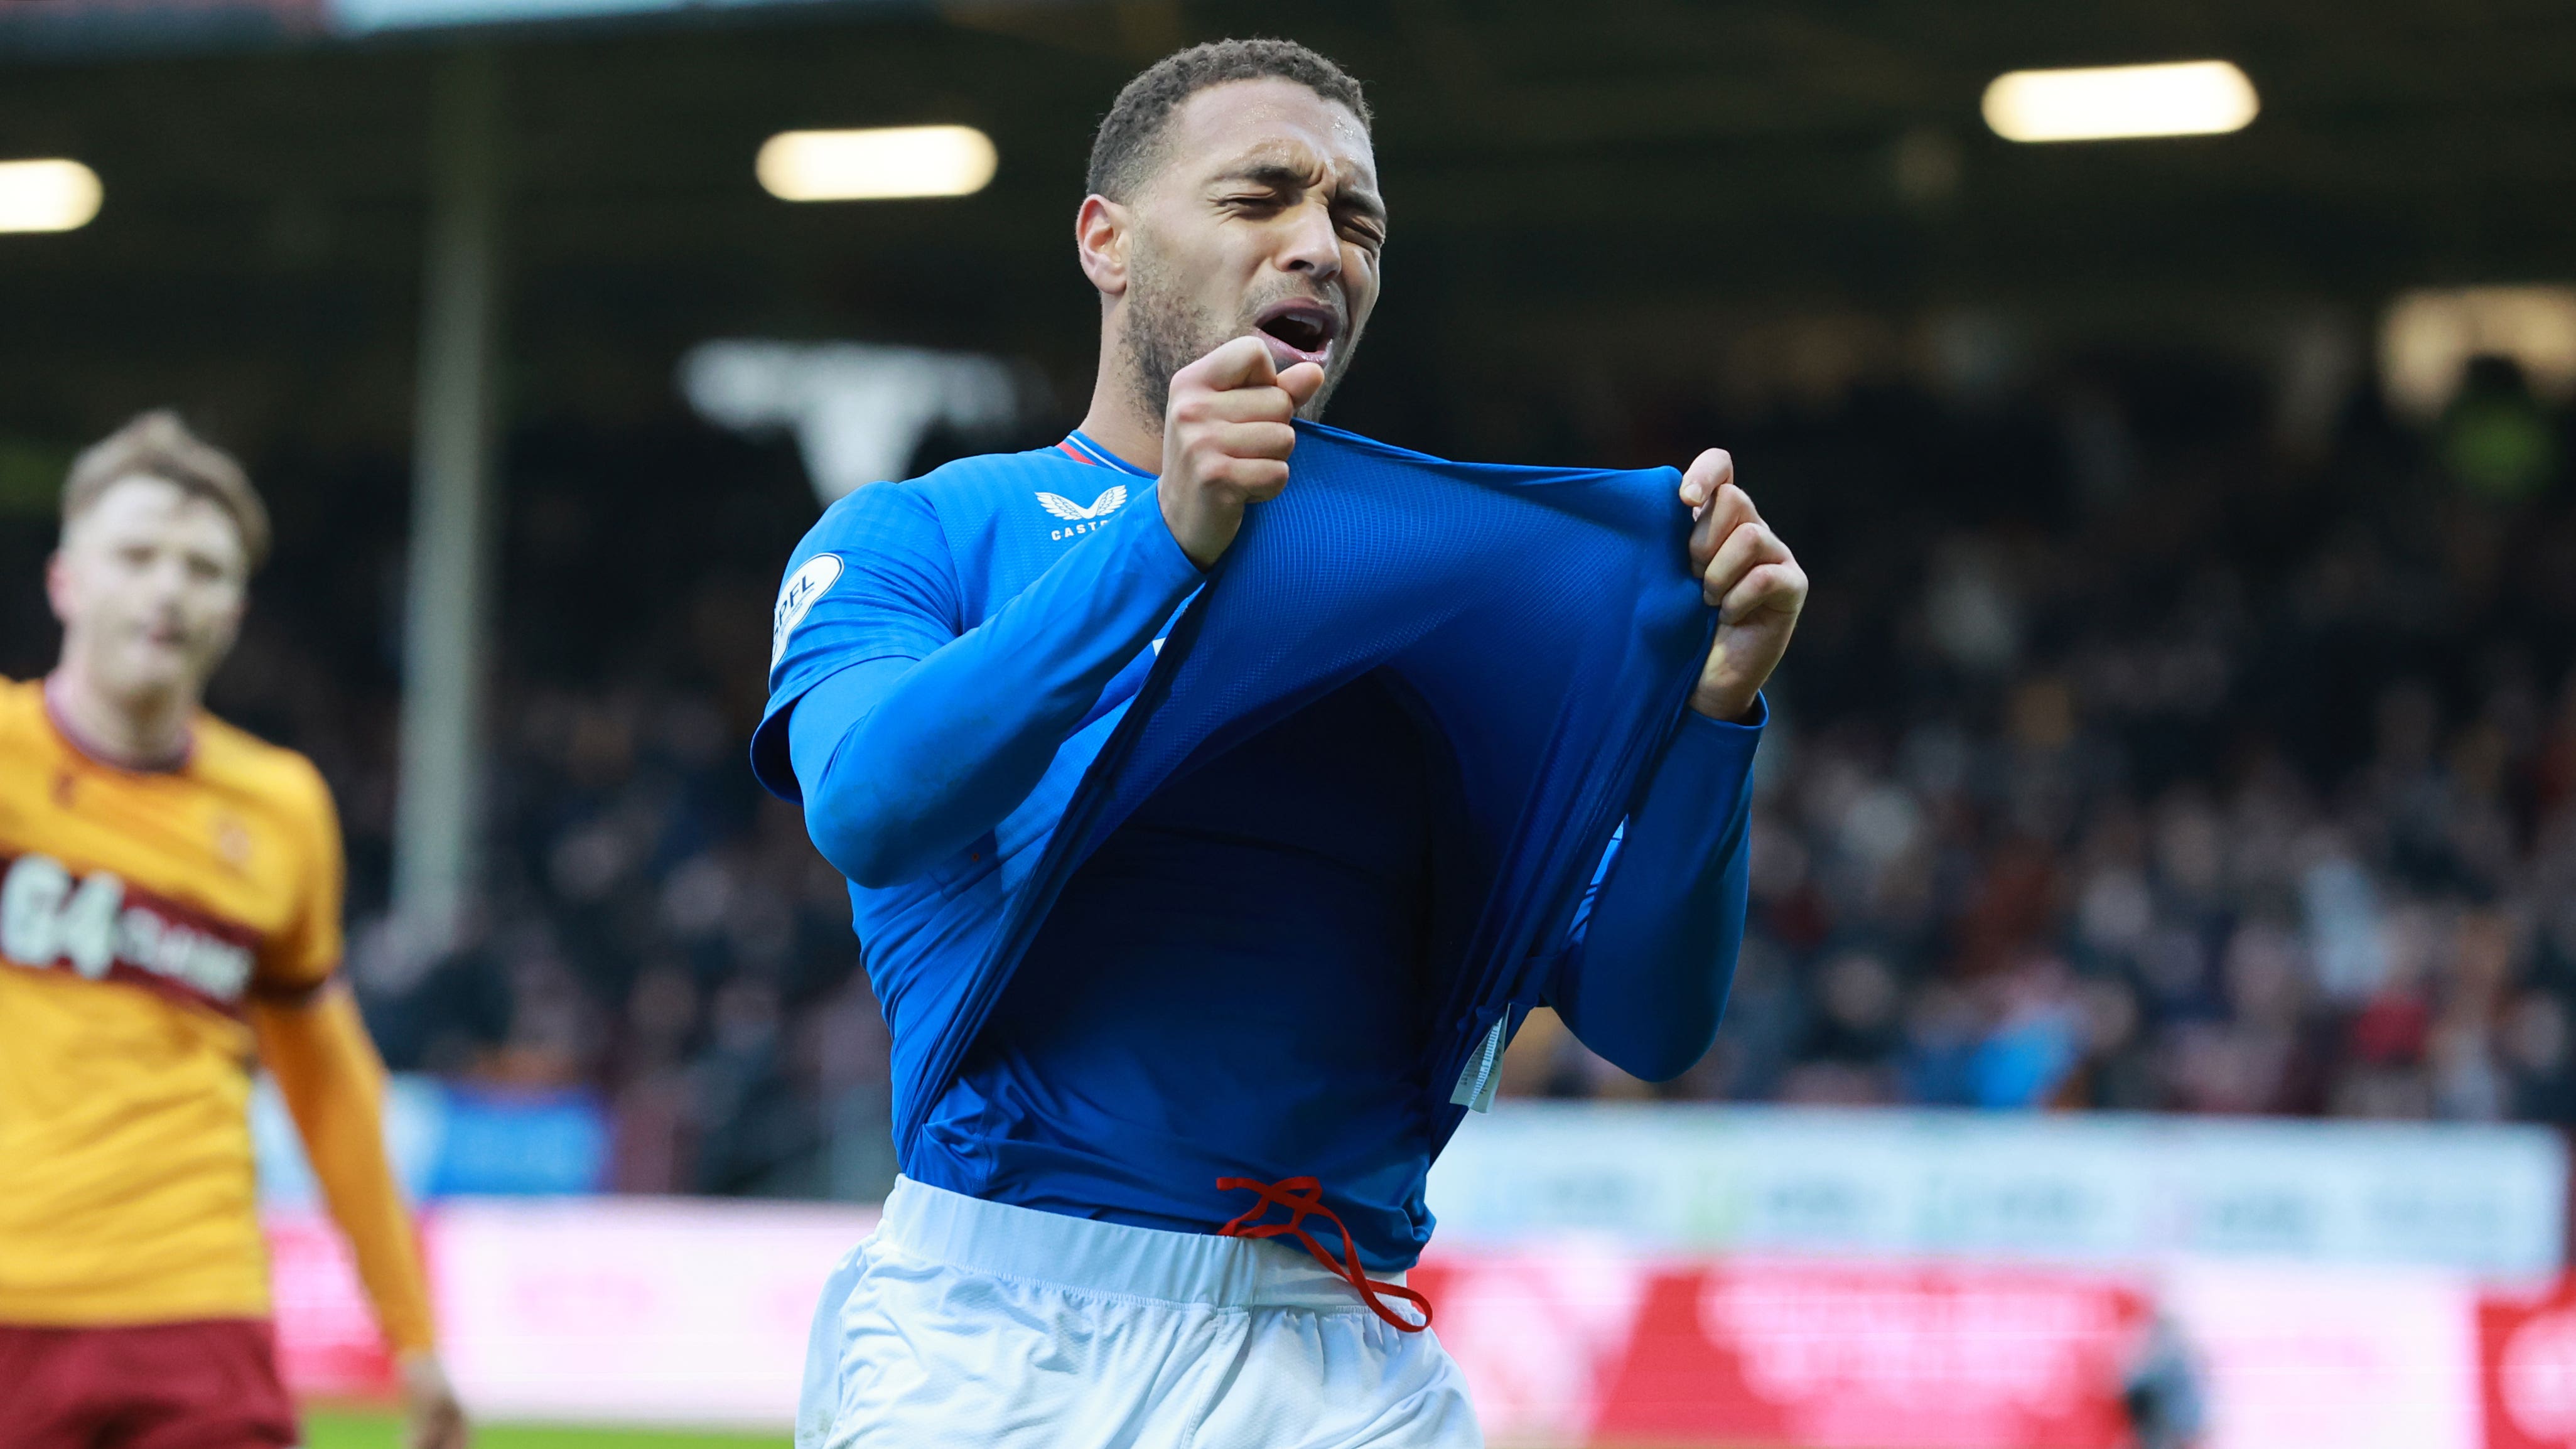 Rangers forward Cyriel Dessers says scoring winner at Celtic ‘would be a dream’